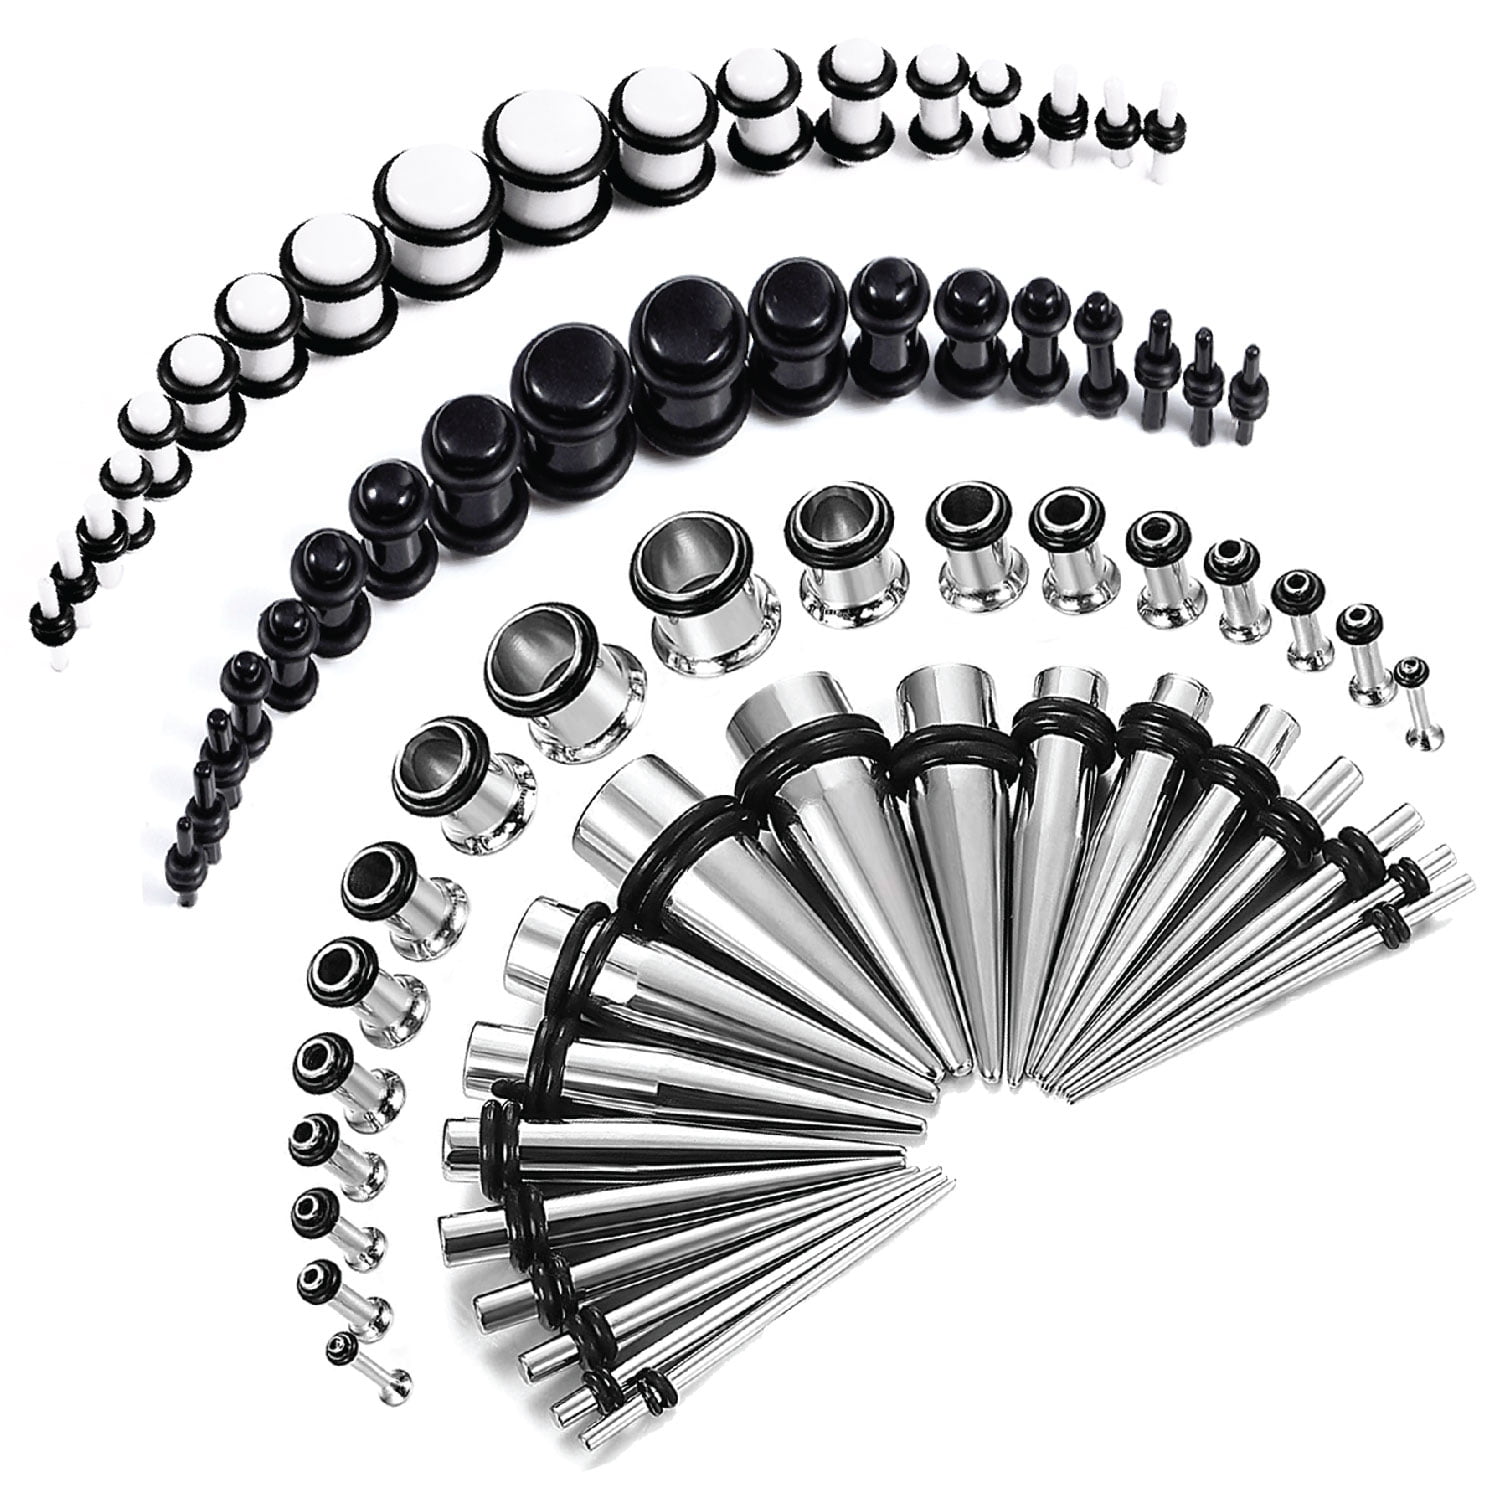 D.Bella 14G-00G Ear Gauges Tapers and Tunnels Gauge Stretching Kit O-Rings Included 316L Stainless Steel Gauging Plugs